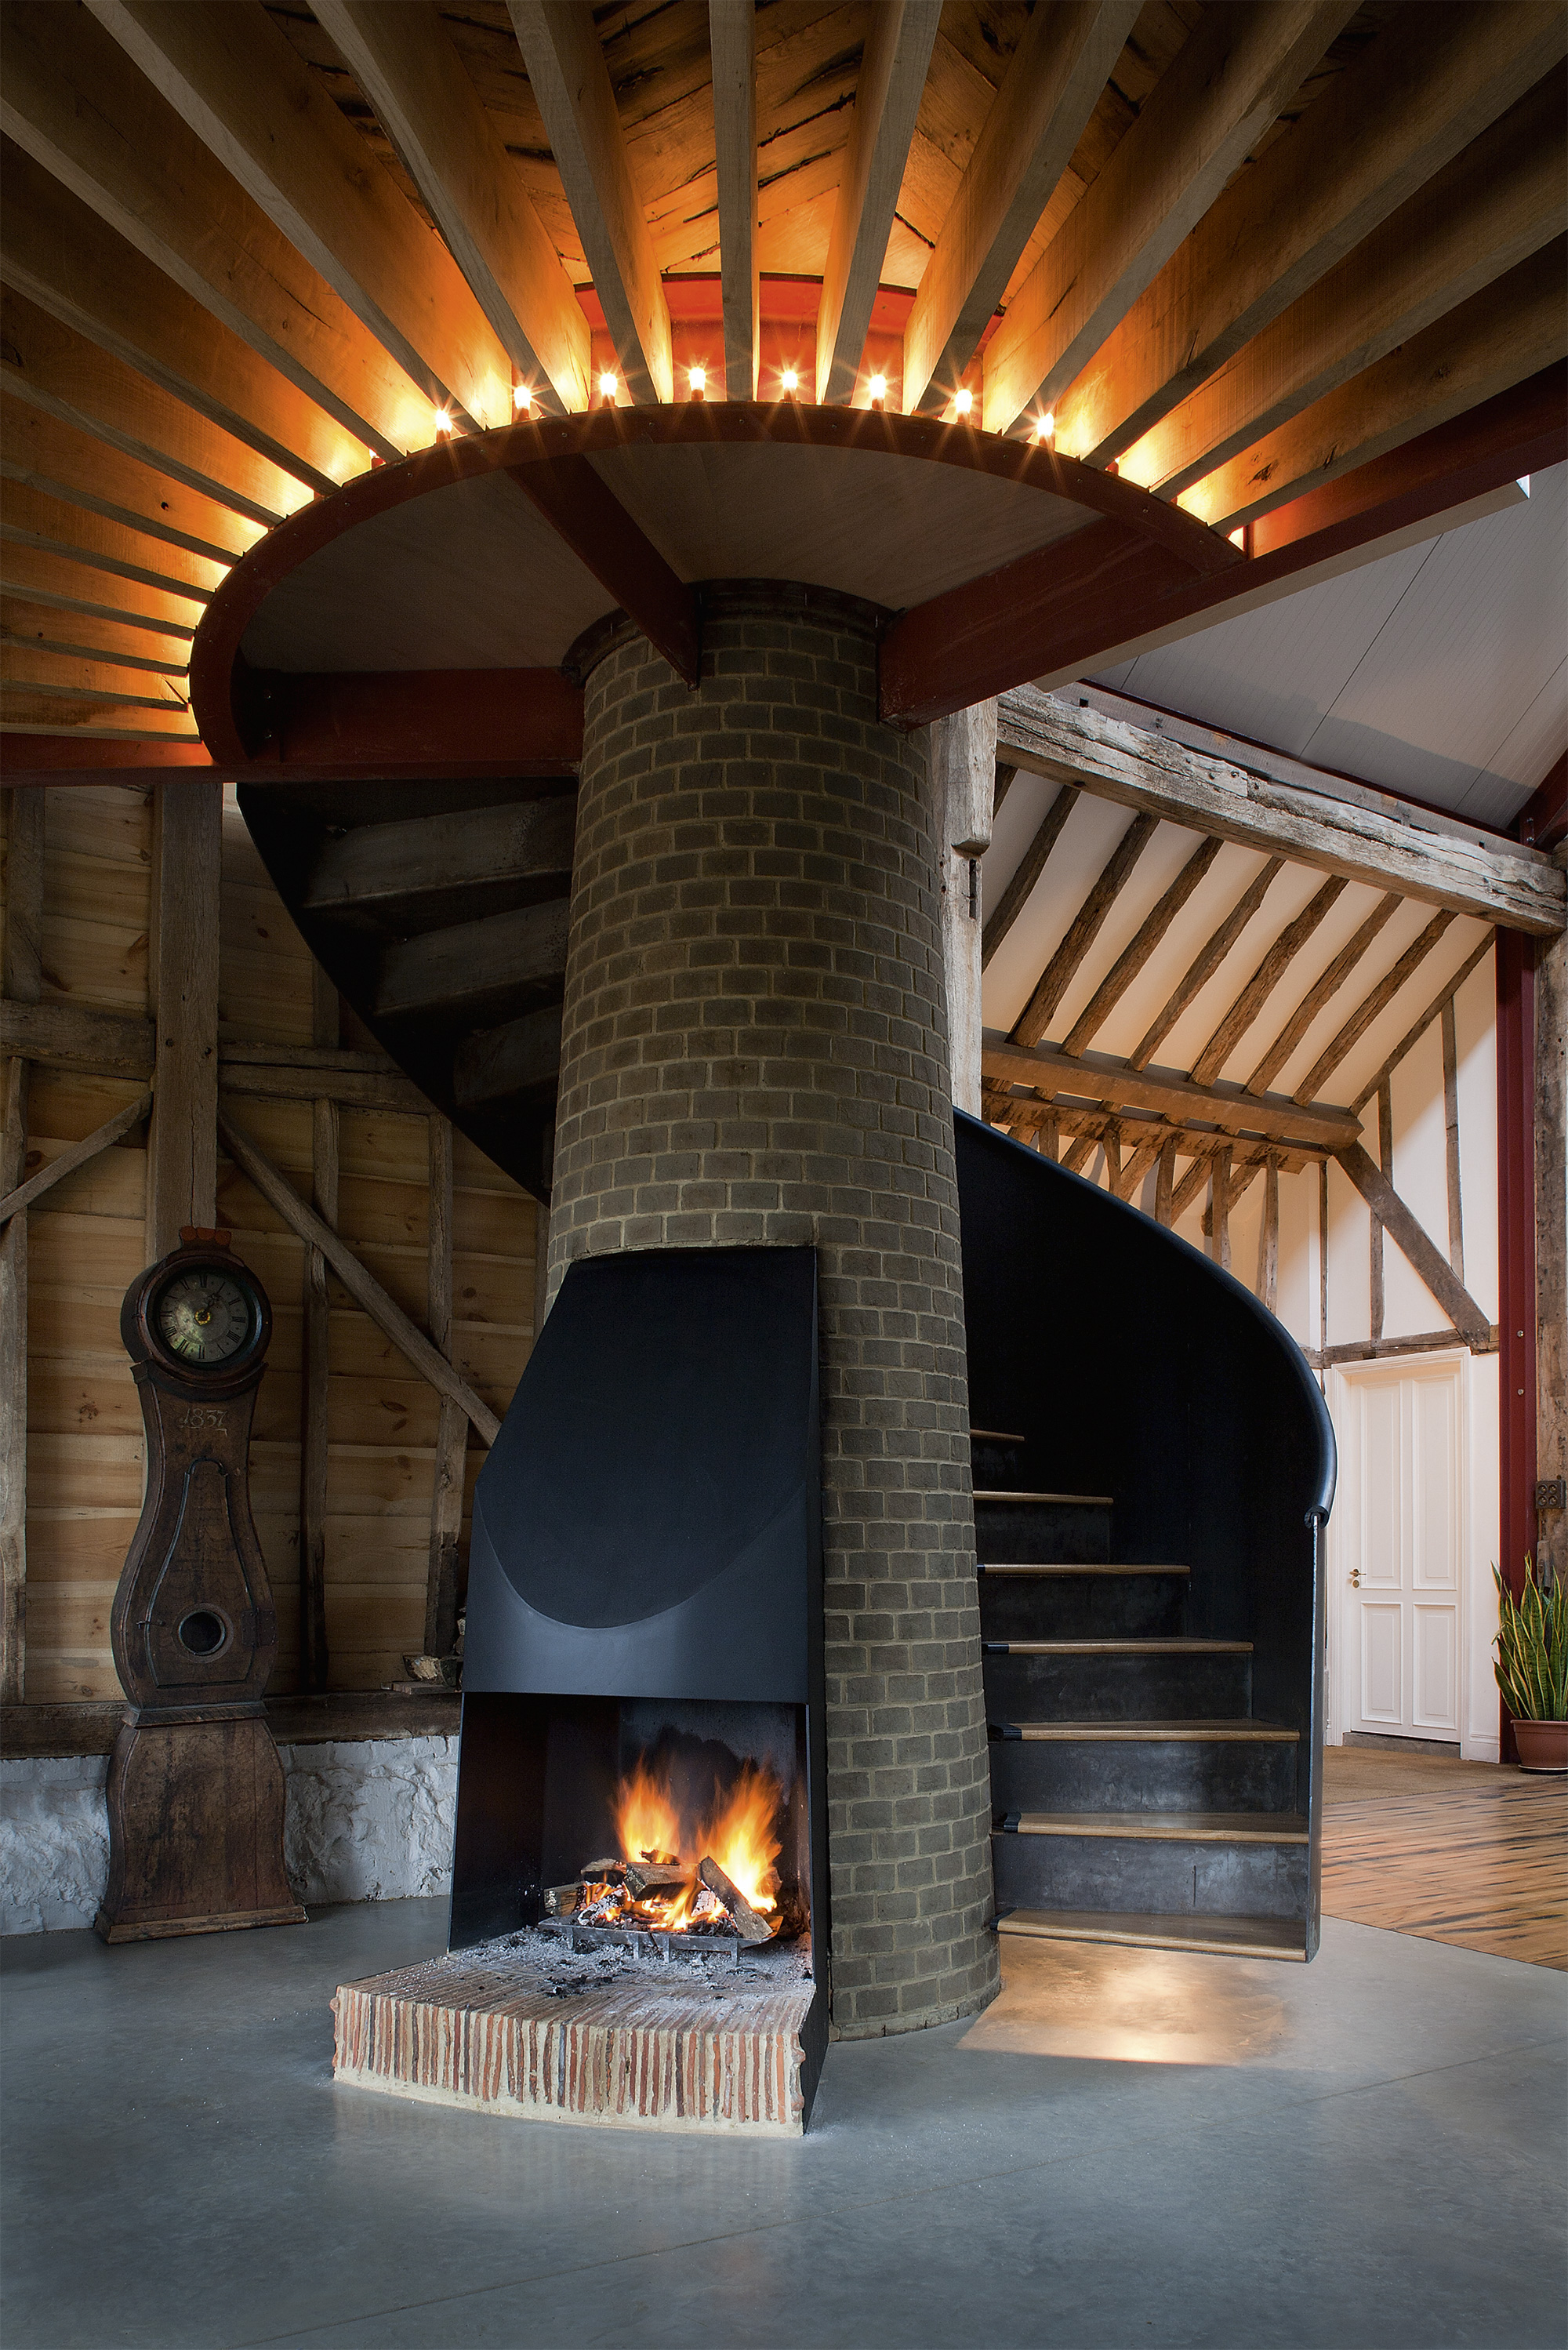 Stairs wrapped around chimney in barn conversion by Liddicoat & Goldhill